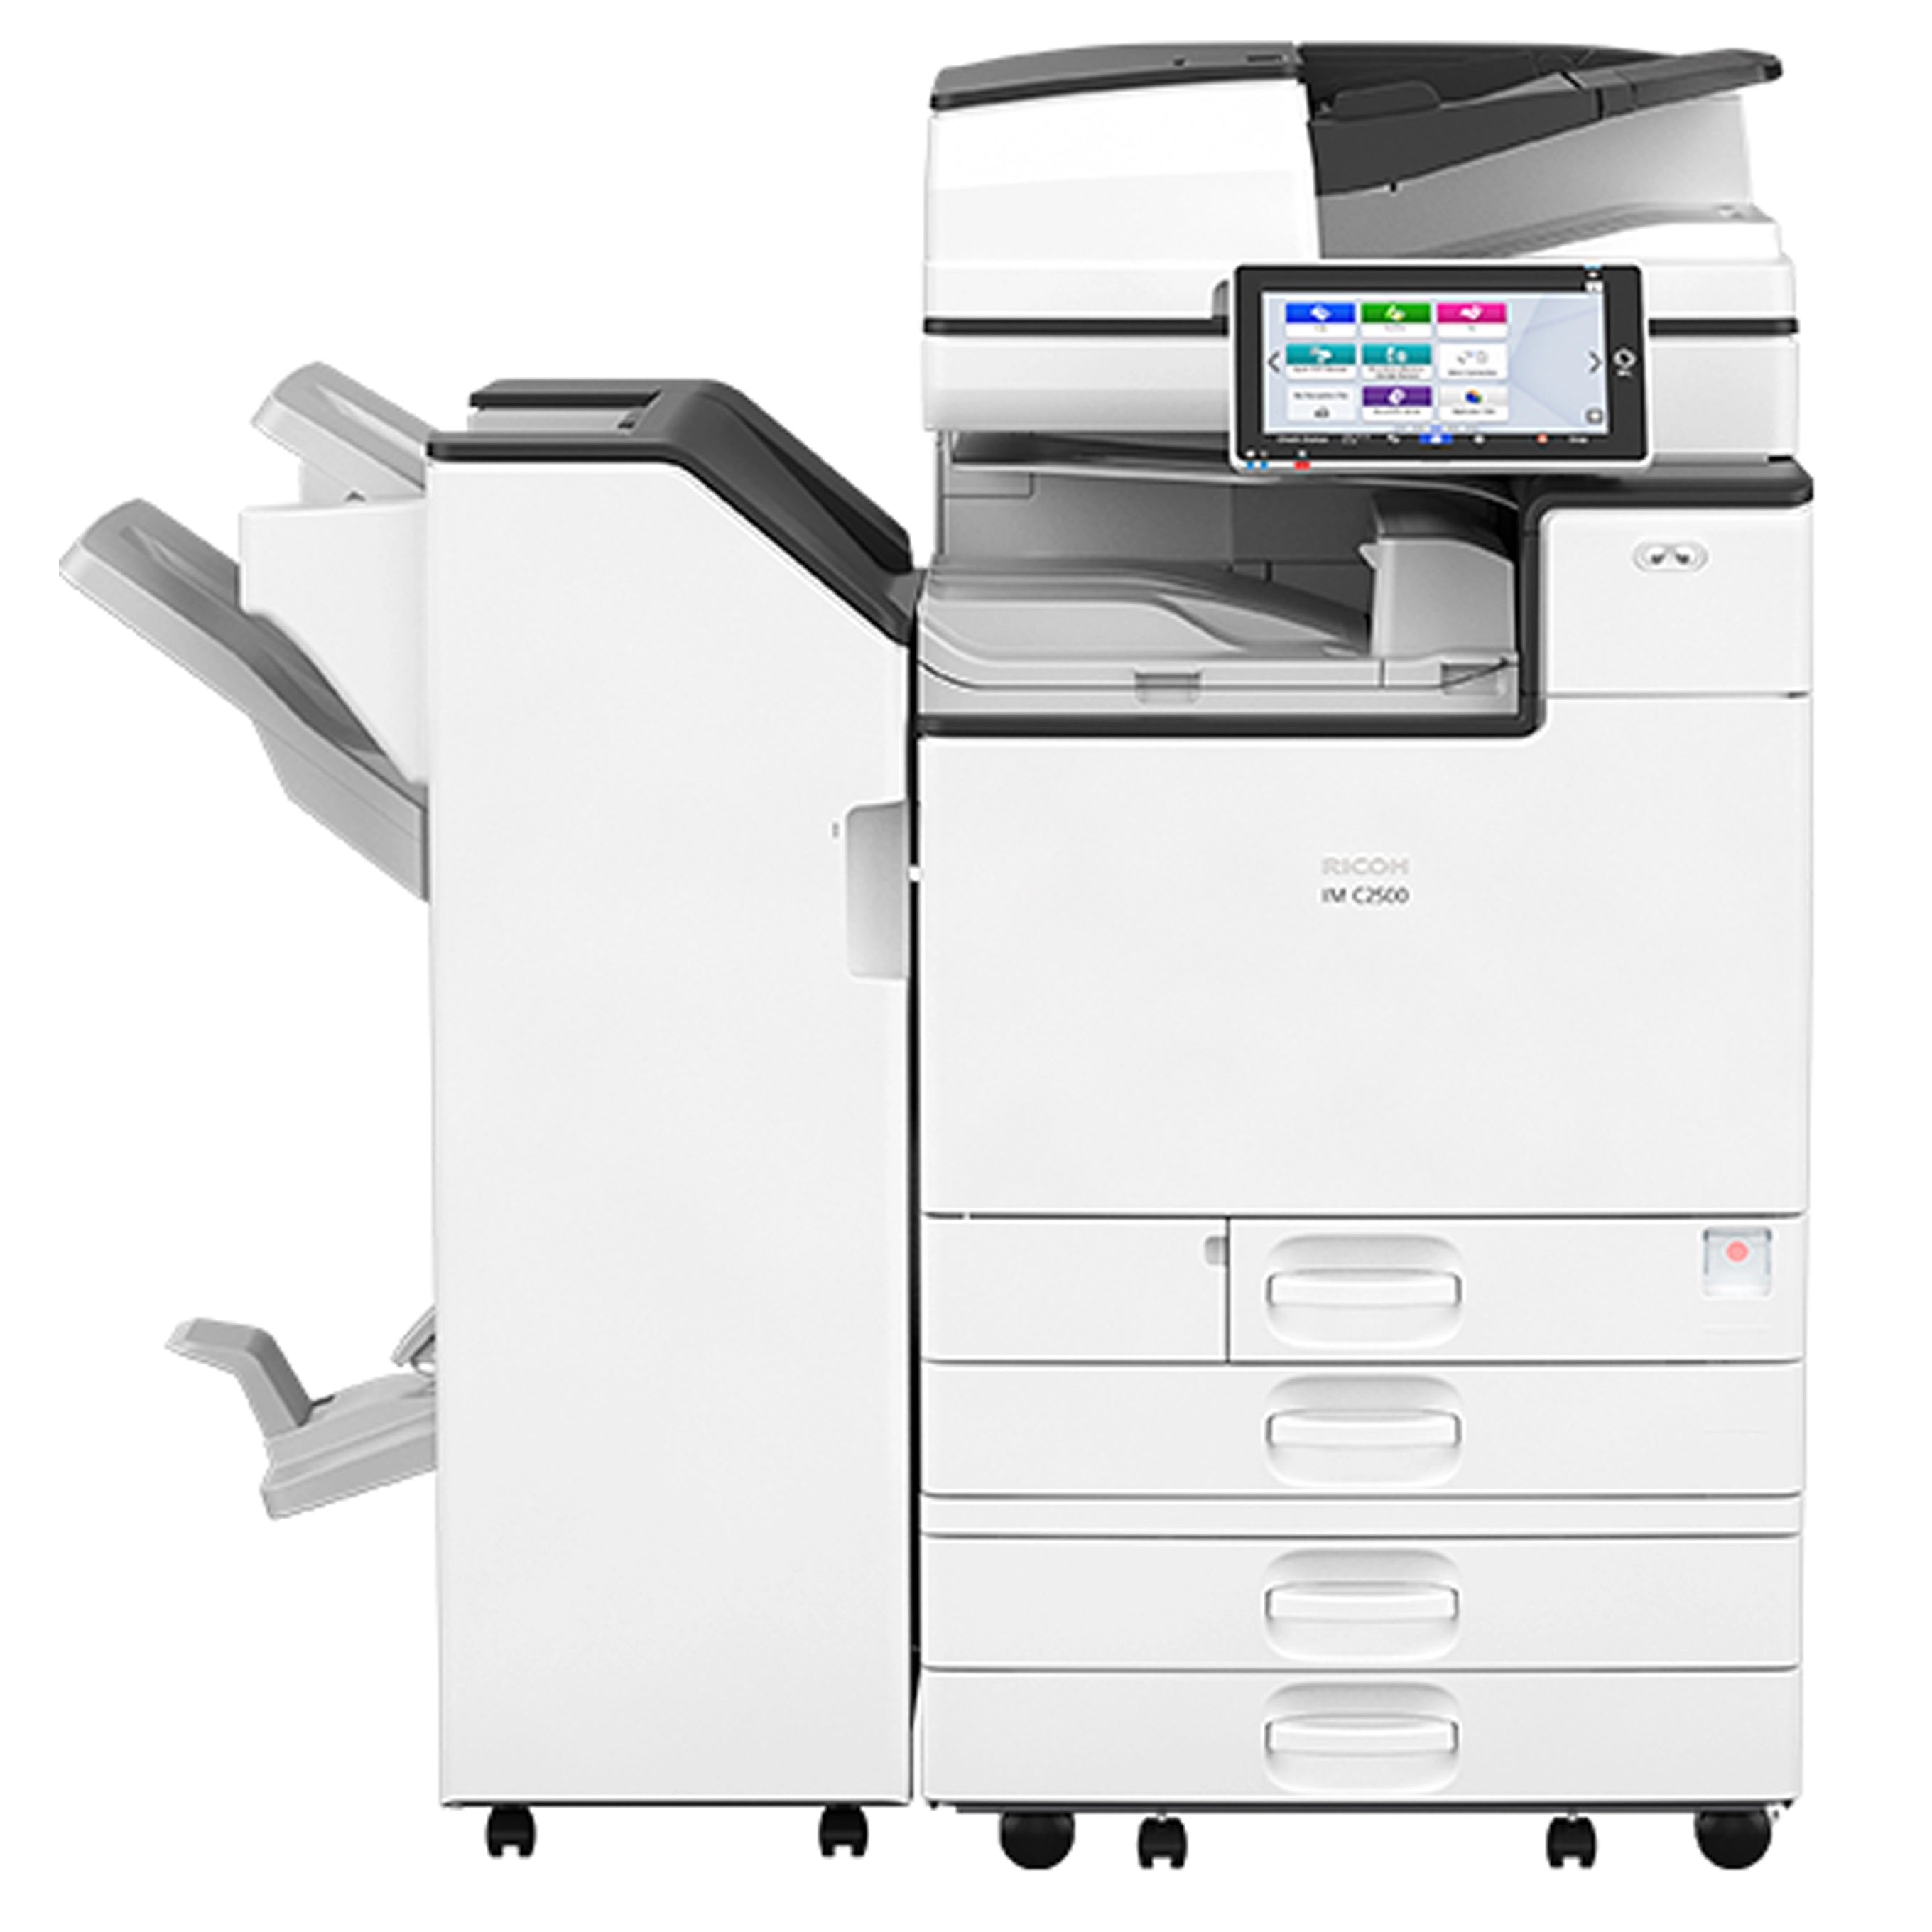 Absolute Toner $79.83/Month LOW PAGE COUNT Ricoh IM C2500 df with MULTI-CASSETTE(4) and 1200dip Resolution 11x17 12x18 Multifunction Business Machine Printer/Copier/Scanner/Fax with ADVANCED FINISHER Printers/Copiers